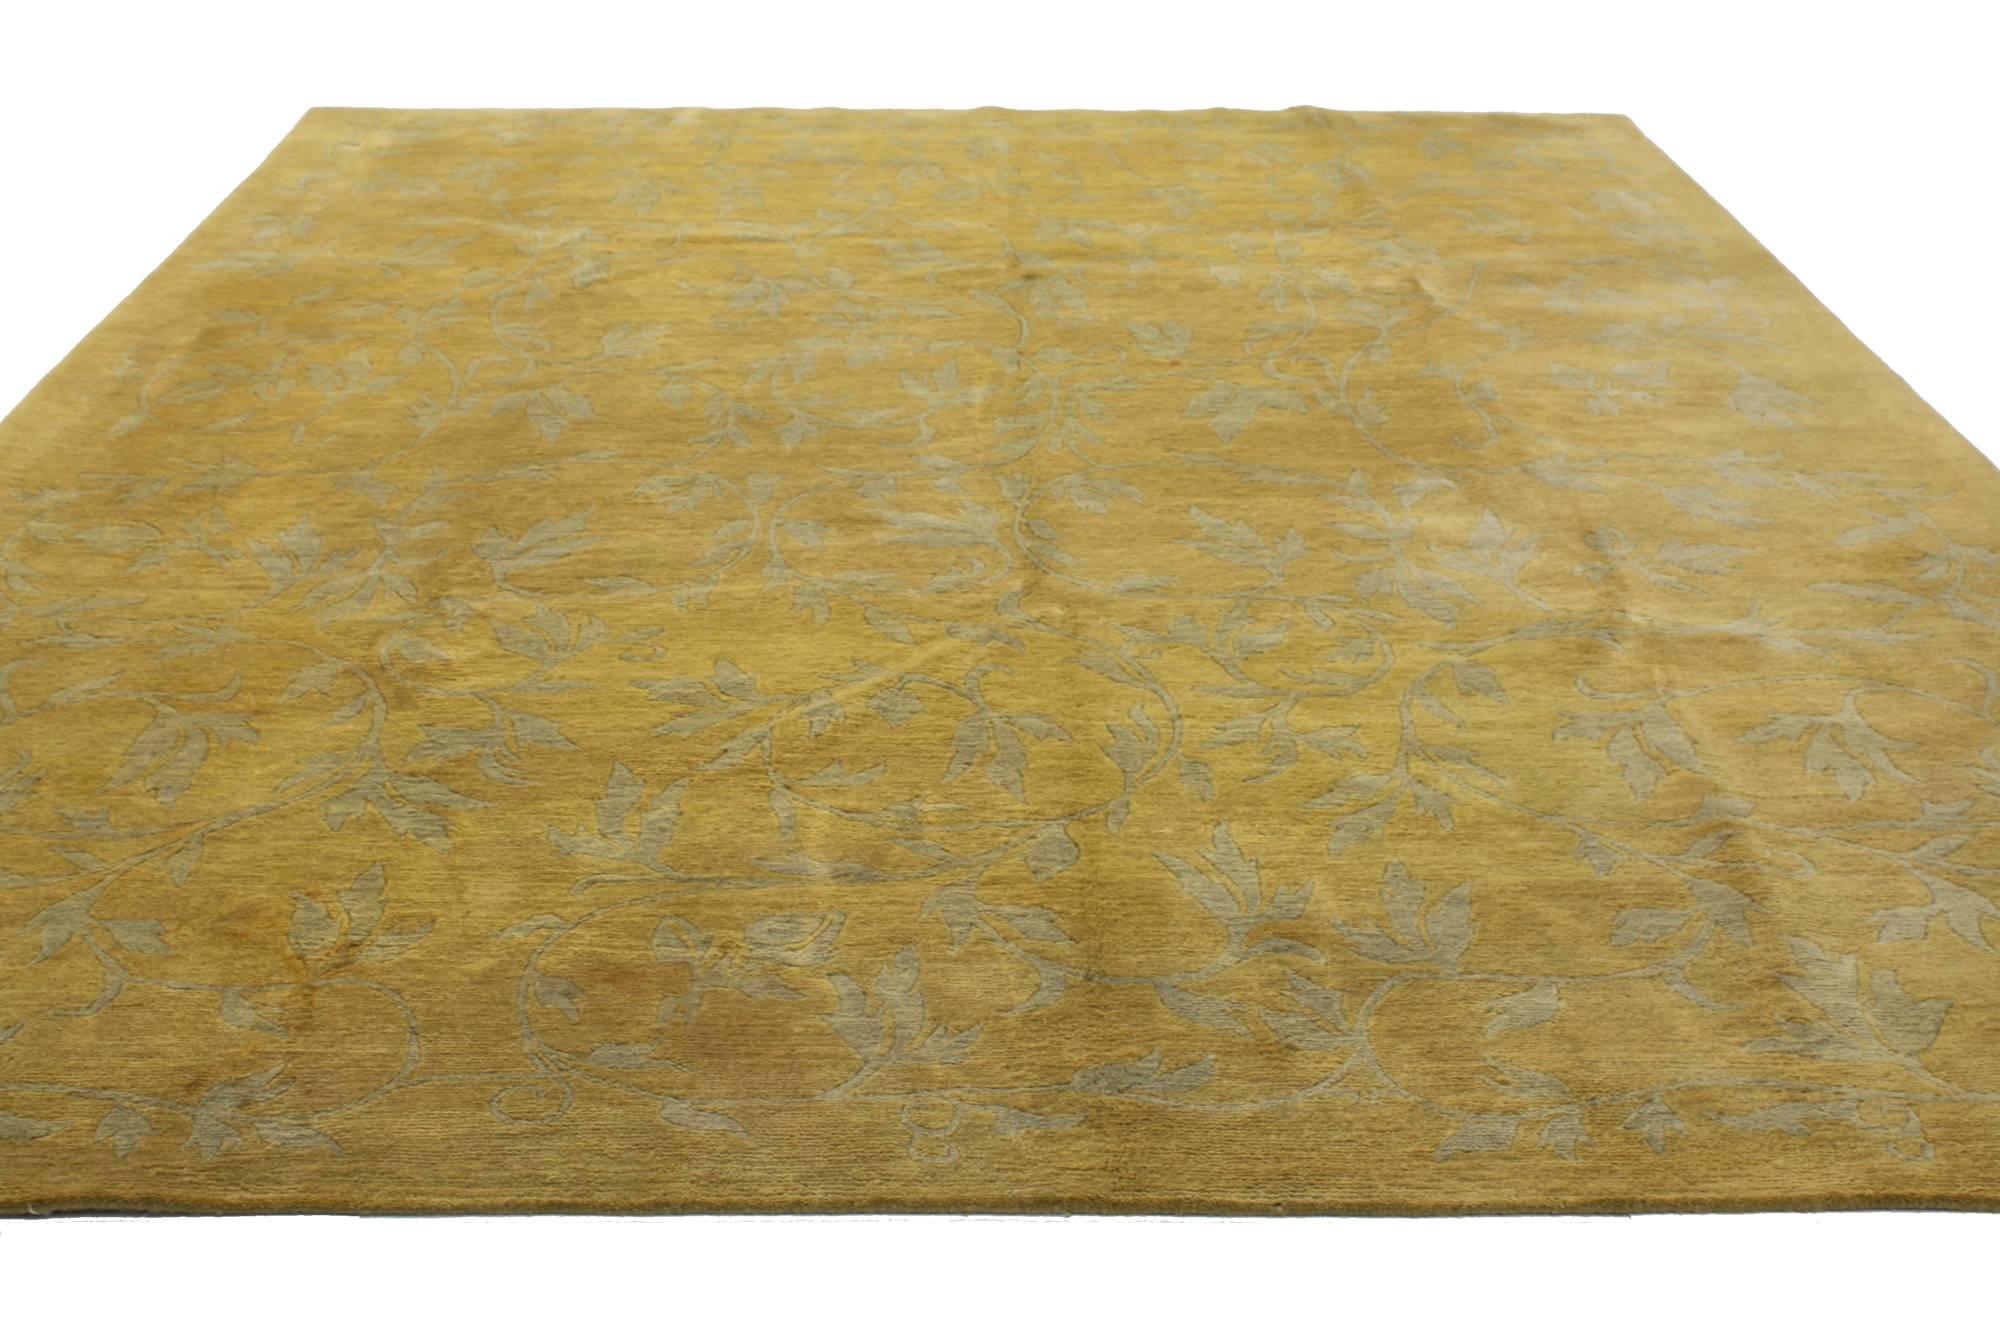 76872, vintage gold Tibetan area rug with Modern traditional style. This hand-knotted wool vintage Tibetan area rug features an all-over pattern of naturalistic leaves and tendrils in gray on a bright golden backdrop. Dramatic and full of luscious